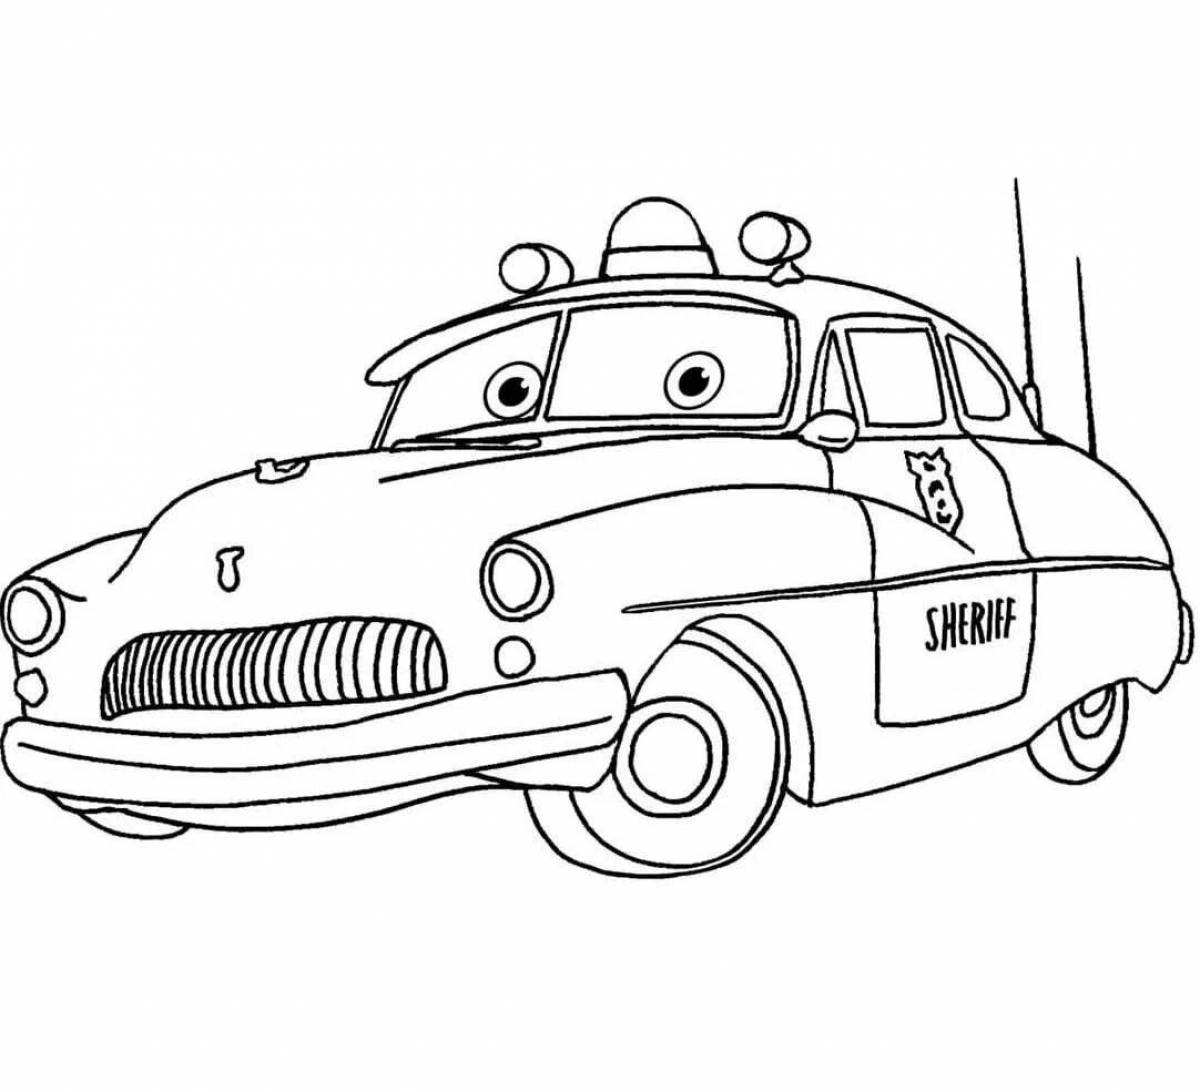 Exciting autopatrol coloring book